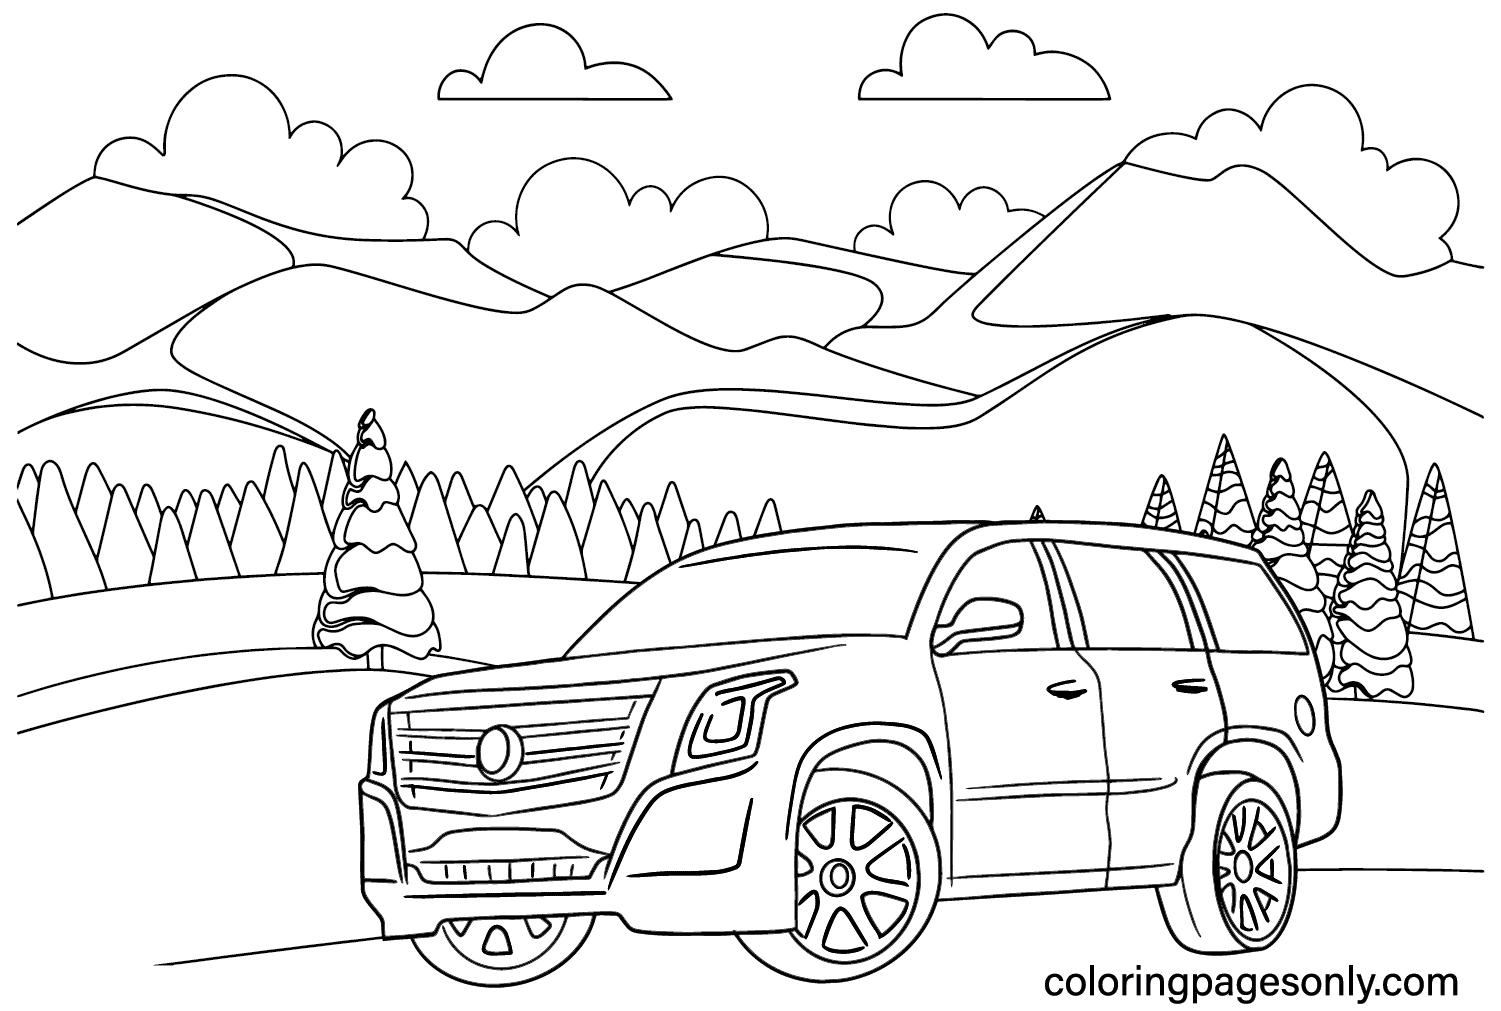 Cadillac Coloring Pages to for Kids